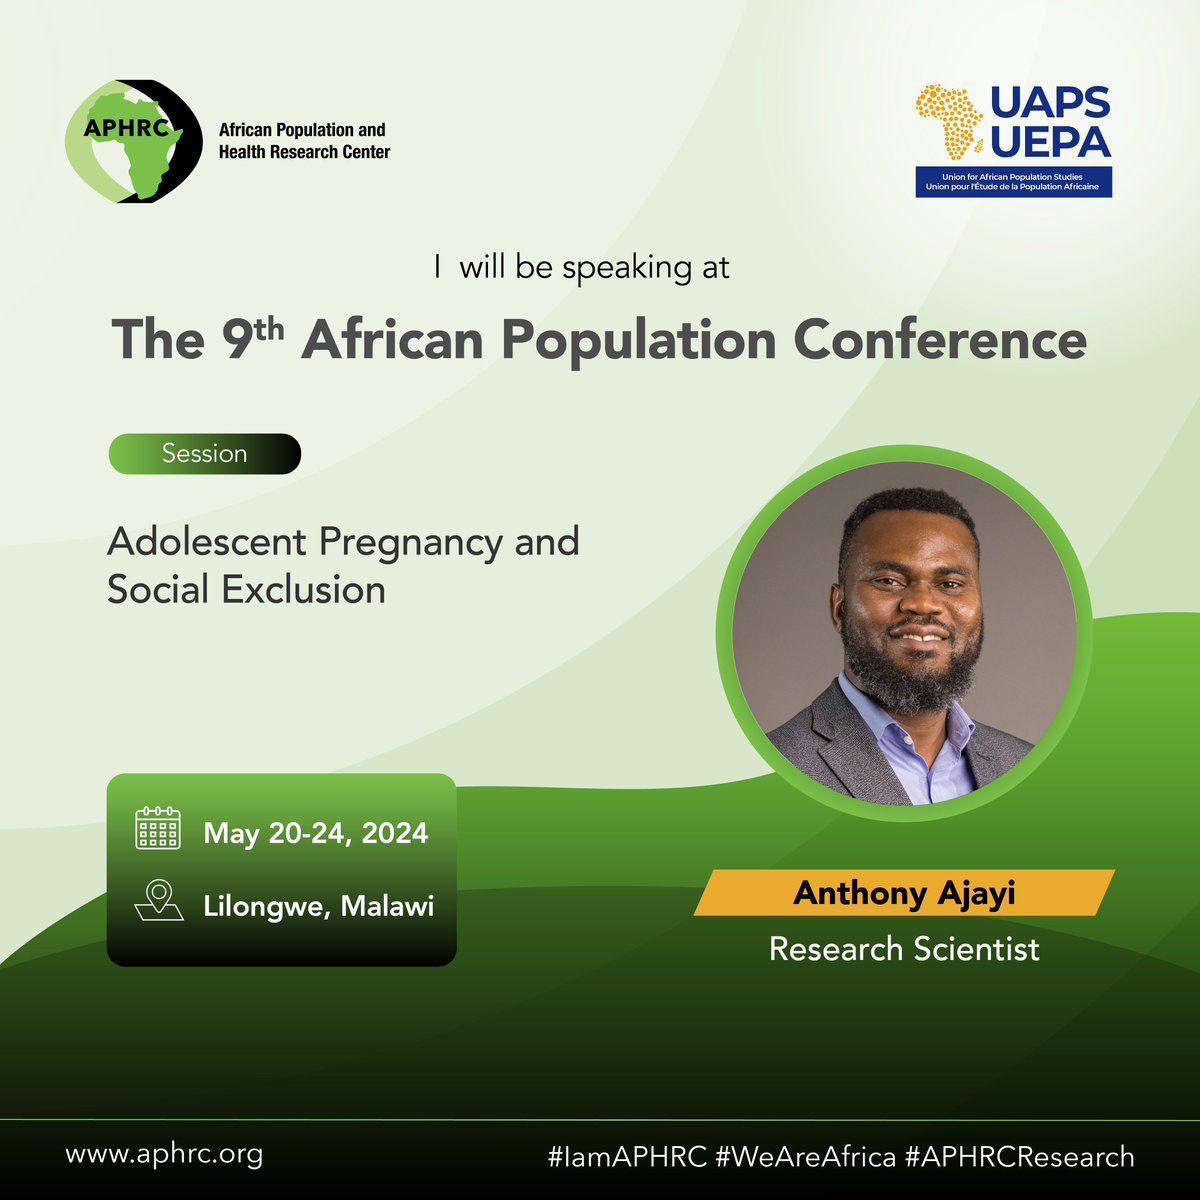 APHRC at the 9th African Population Conference by 
@UAPS_UEPA.  

@aiajayi will participate in a panel discussion on Adolescent Pregnancy and Social Exclusion.

Stay tuned for more.

#APC2024 #9thAPC
#APCMalawi #WeAreAfrica #APHRCResearch